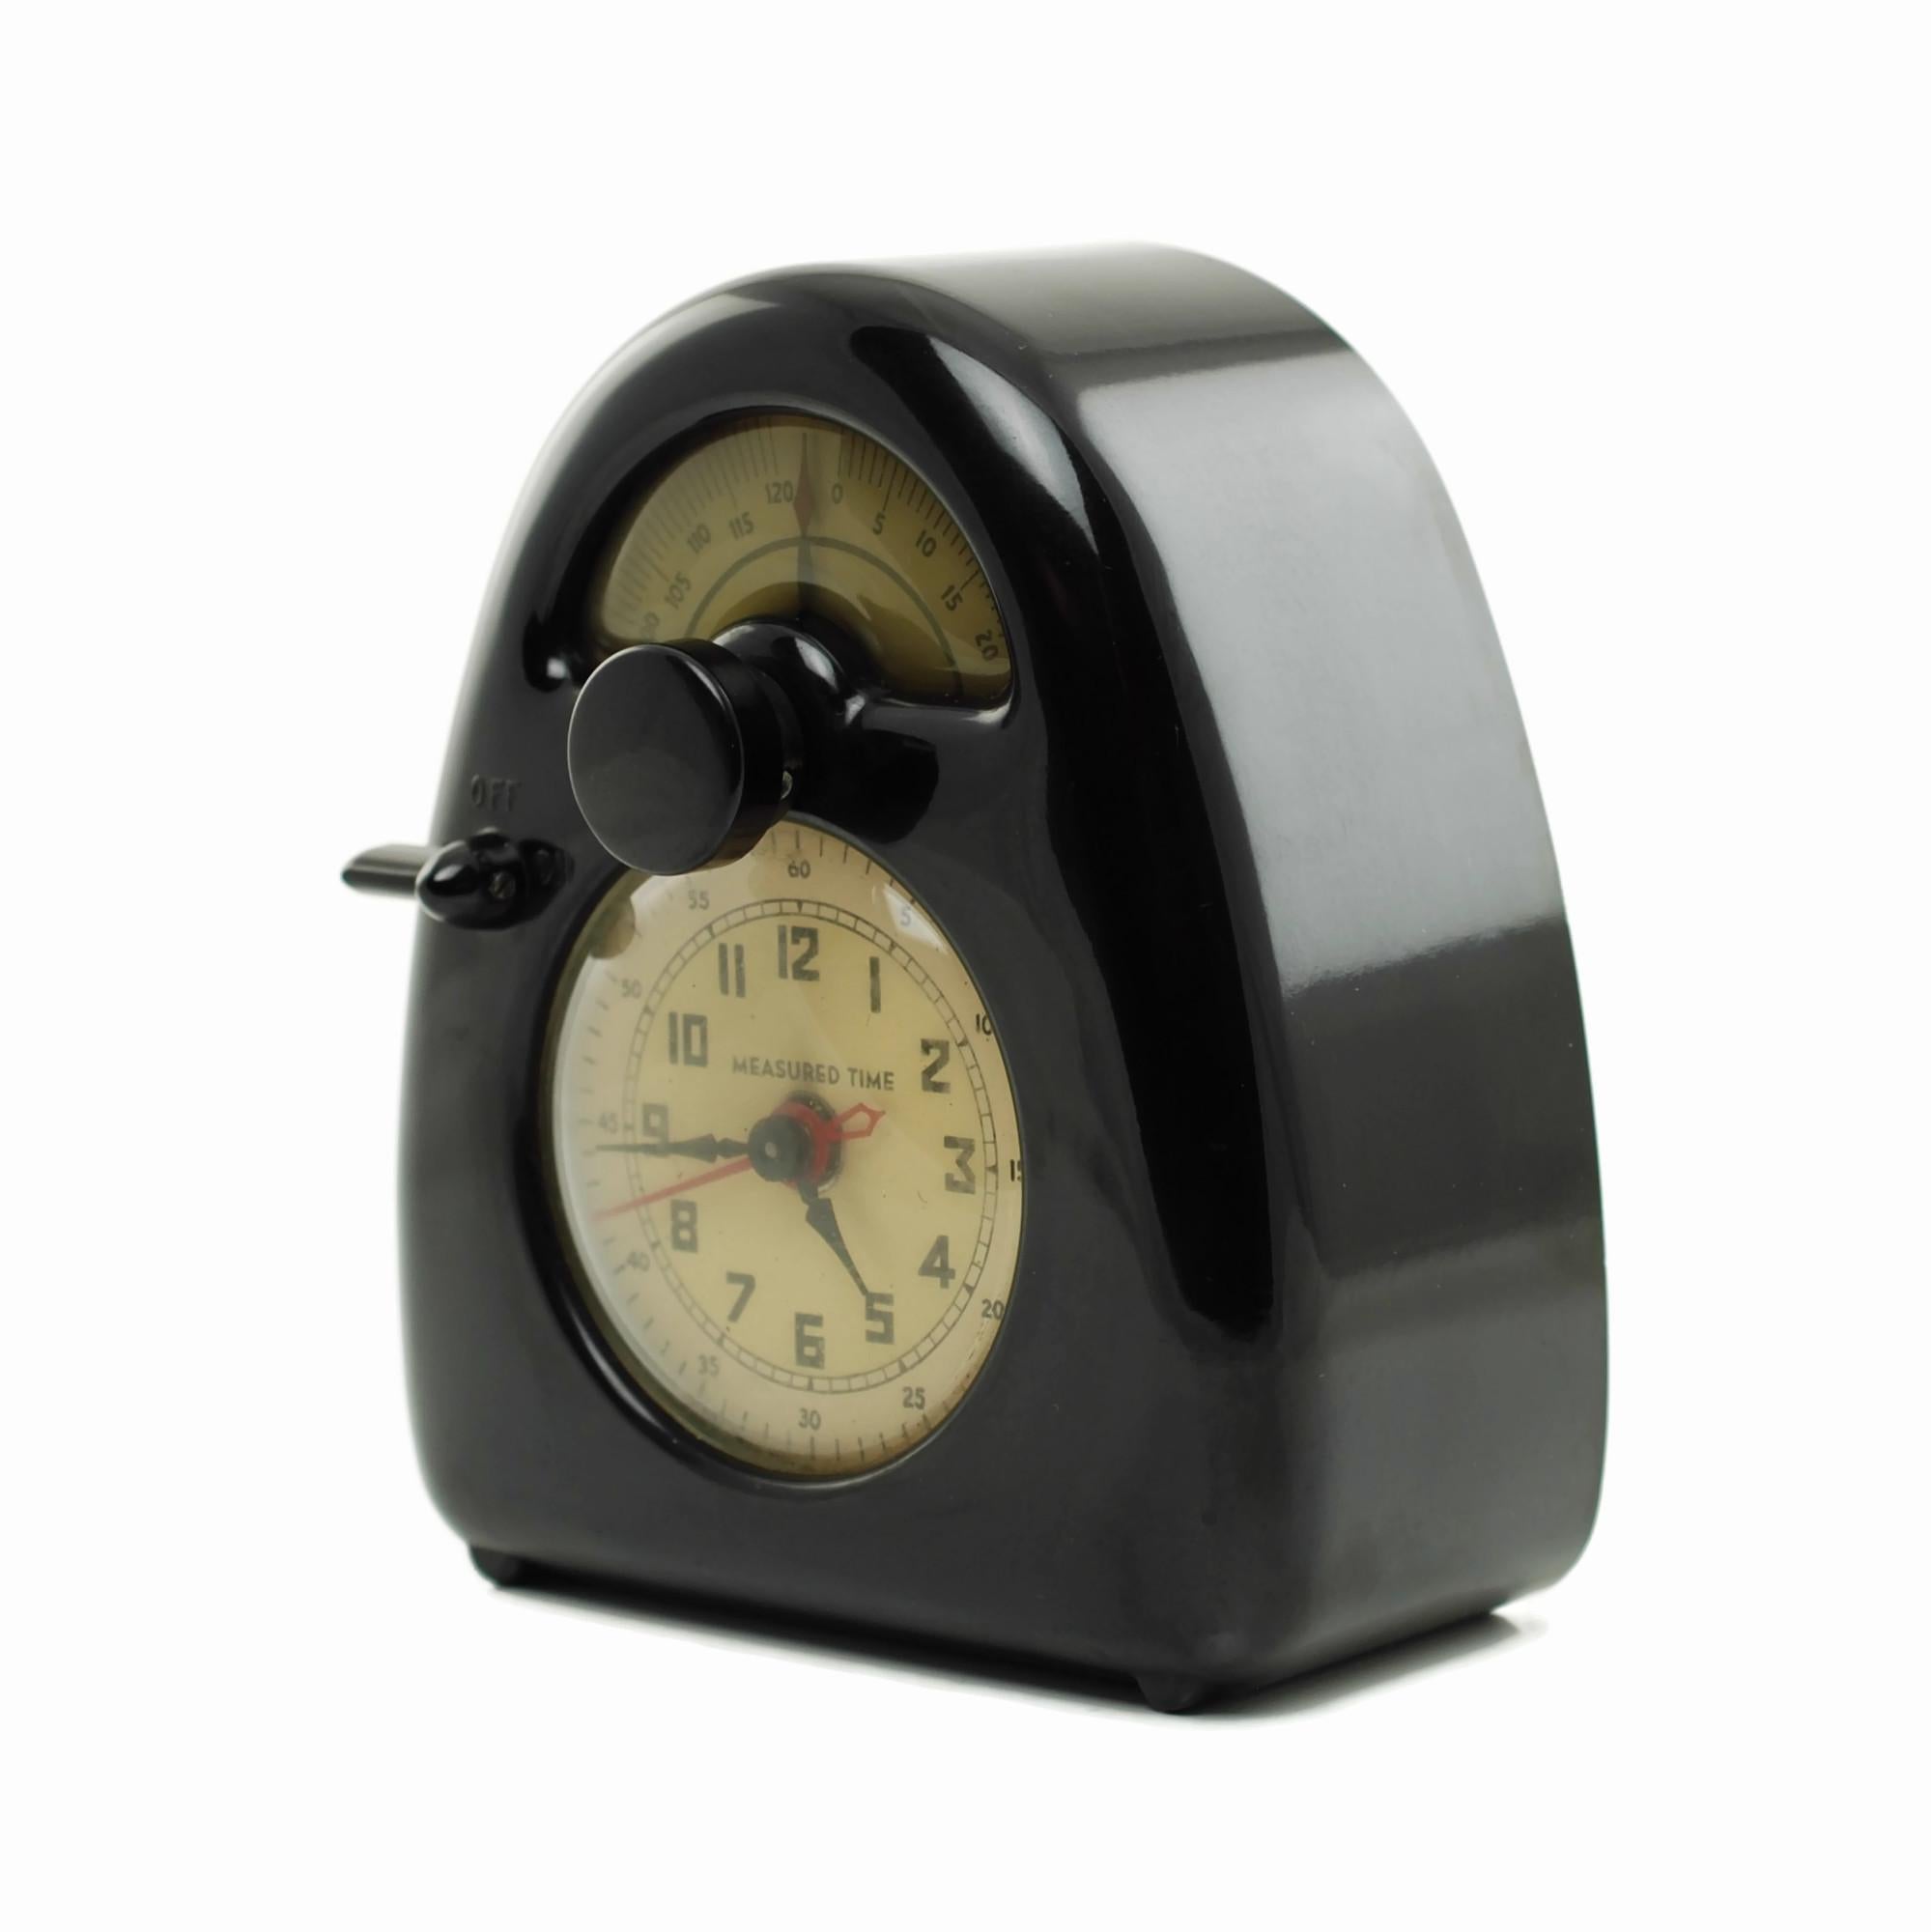 This circa 1930s Hawkeye electric clock timer was designed by noted sculptor, landscape artist and industrial designer Isamu Noguchi (1904-1988). The piece features a shiny black bakelite arched case and has a large round clock face with a domed